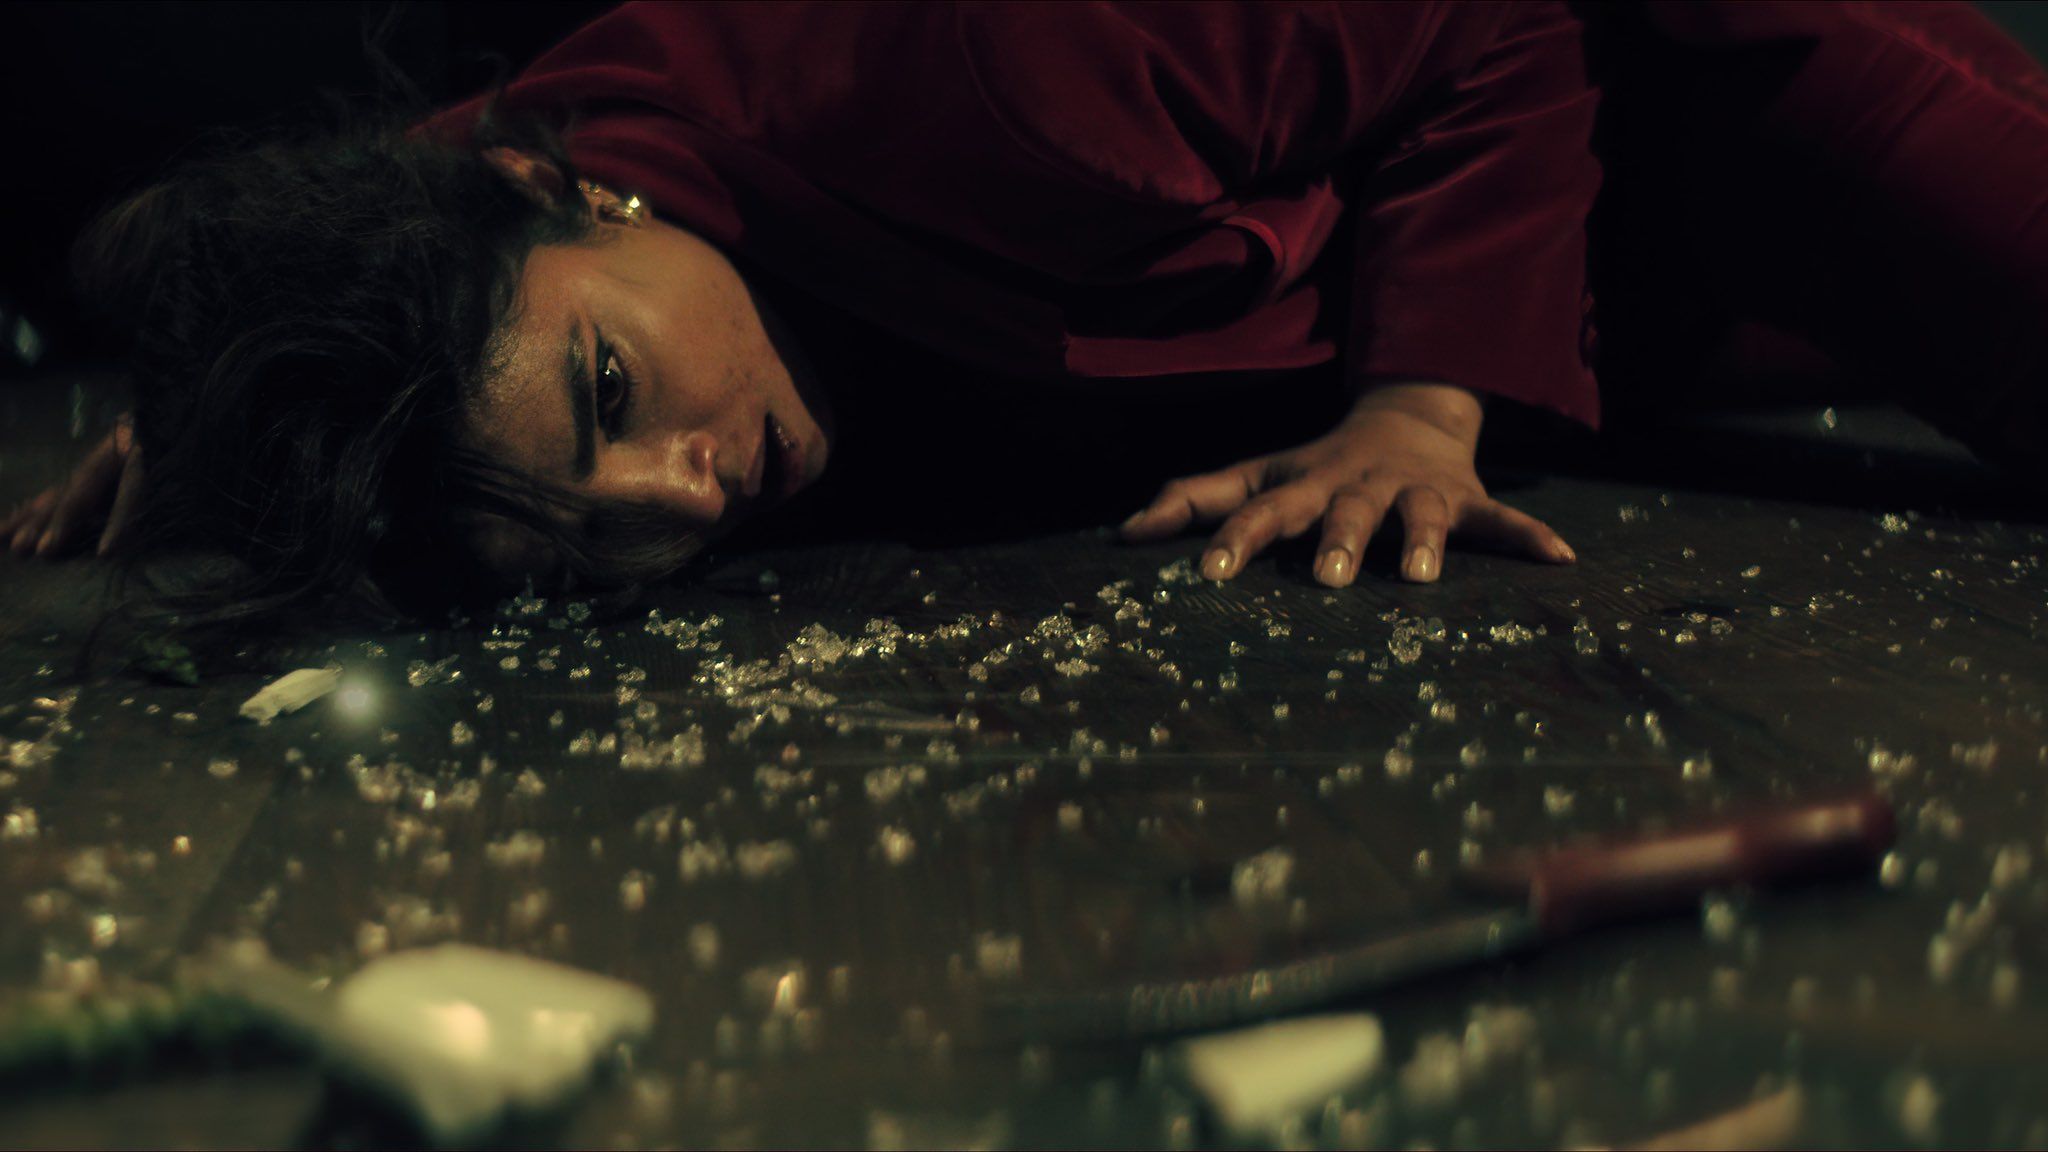 Priyanka Chopra laying on a floor covered in glass in Citadel